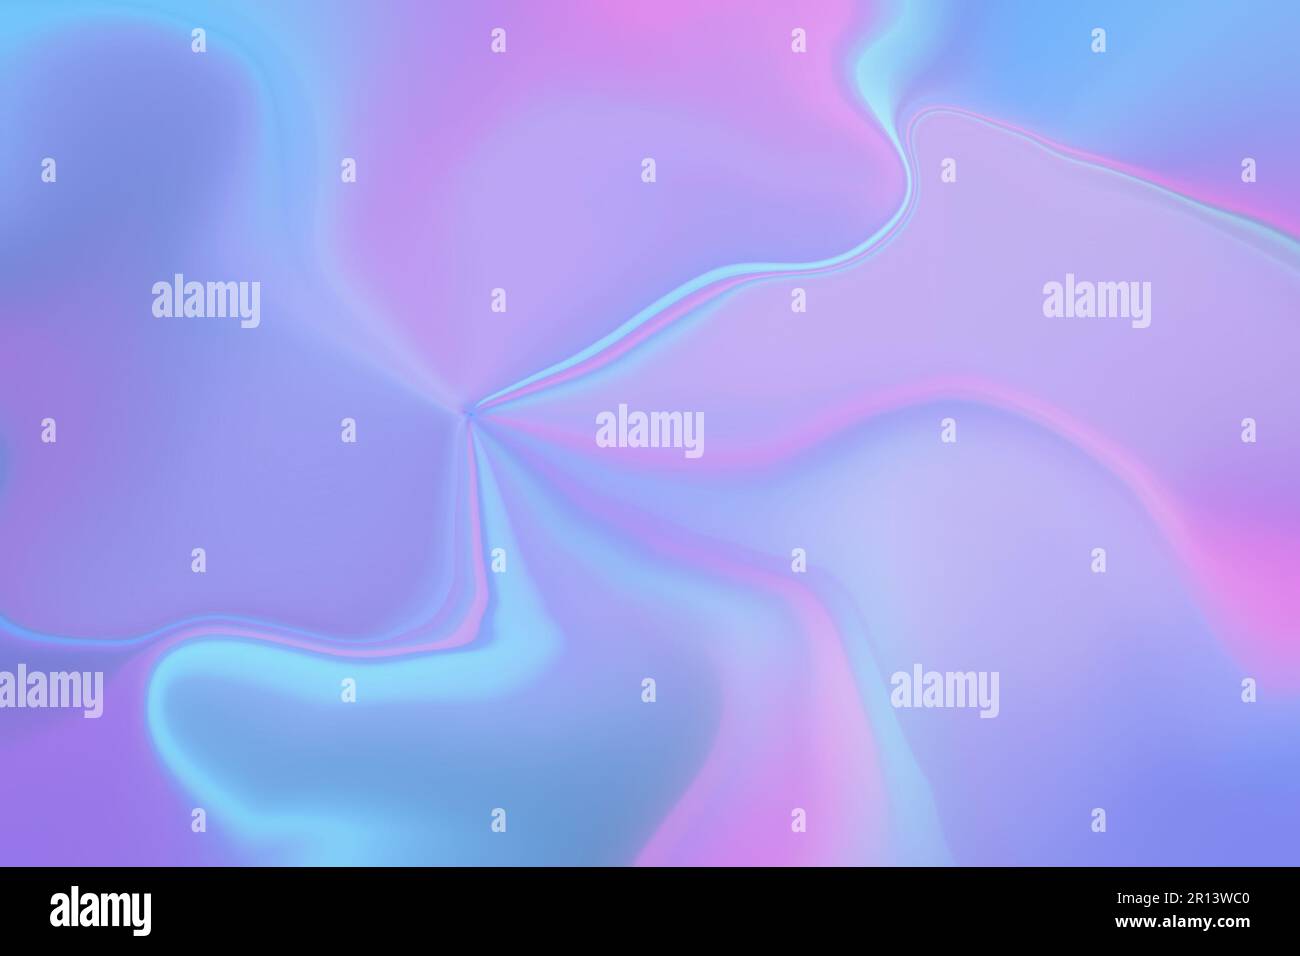 Colorful digital art, illustration, purple, blue background, wallpaper, abstract. Space theme, outer space, world, worldy Stock Photo